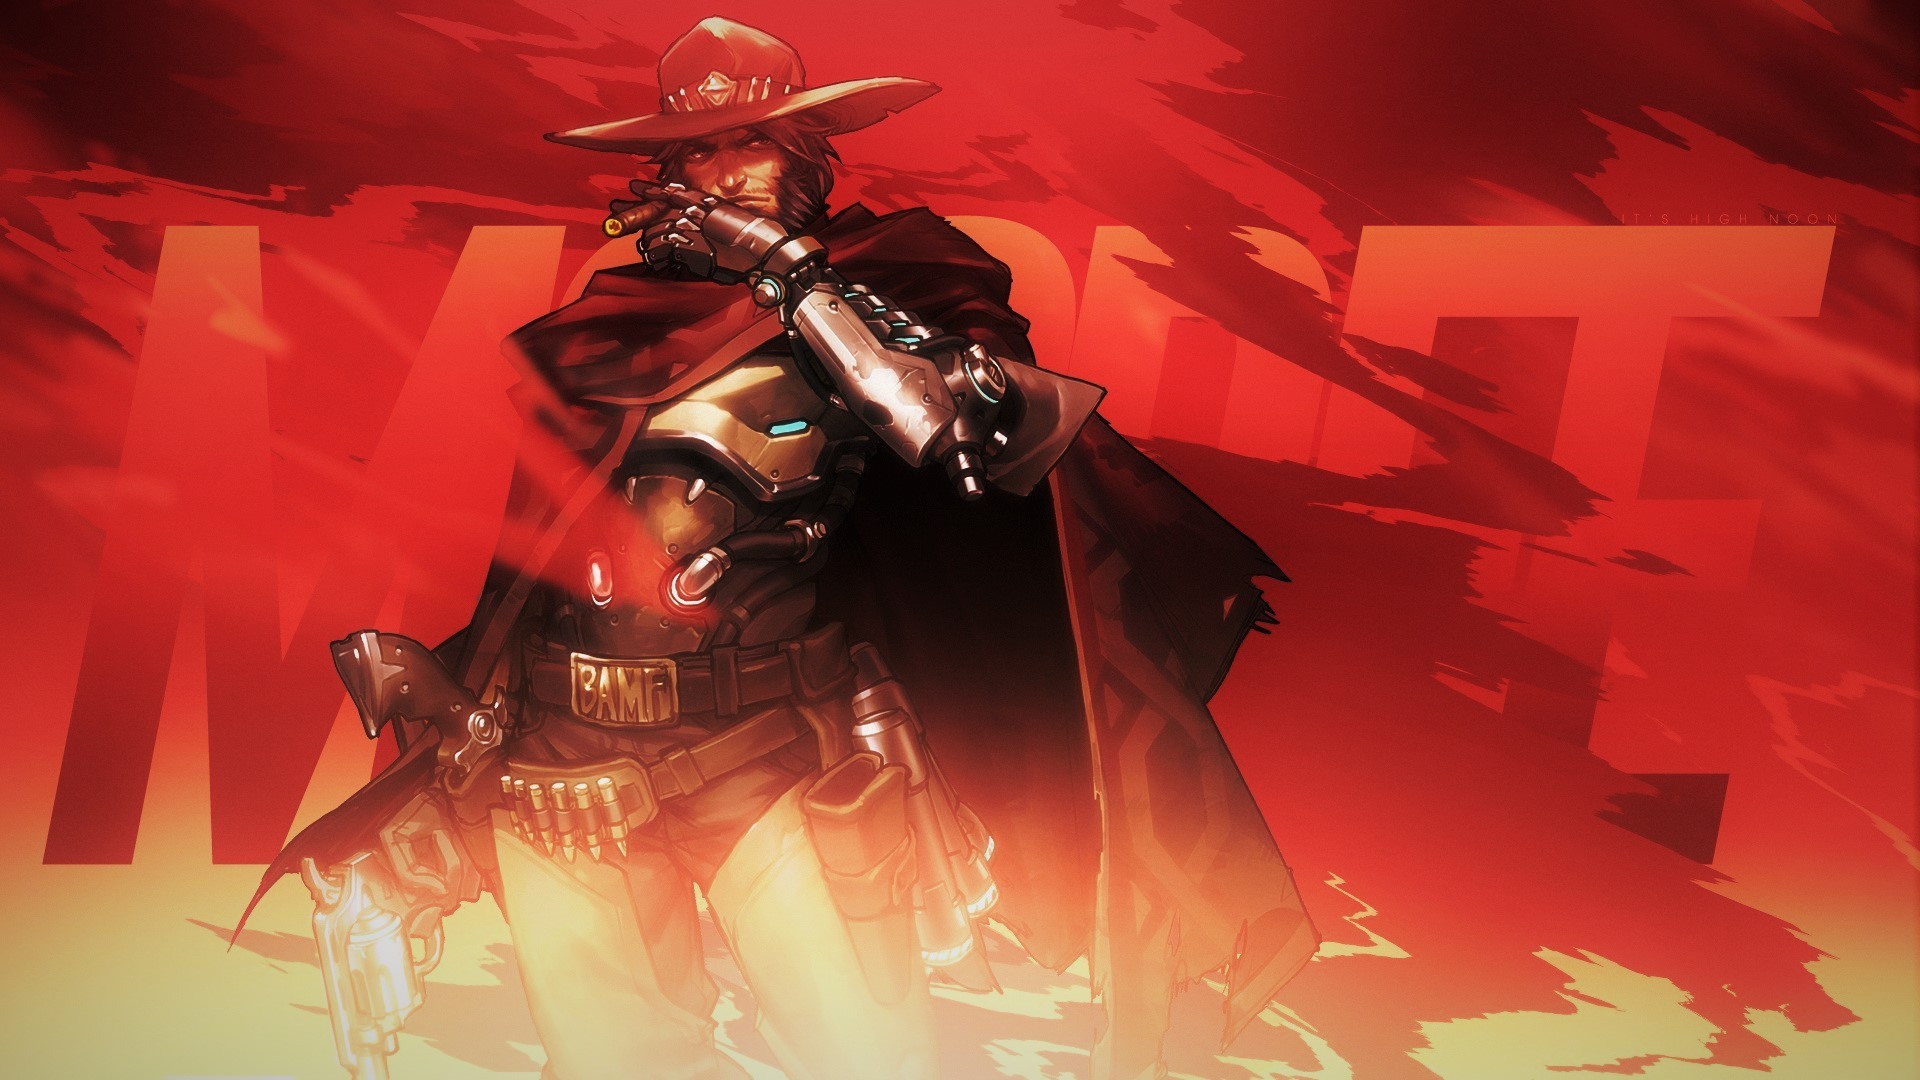 McCree (Overwatch), PC gaming, Computer, Blizzard Entertainment